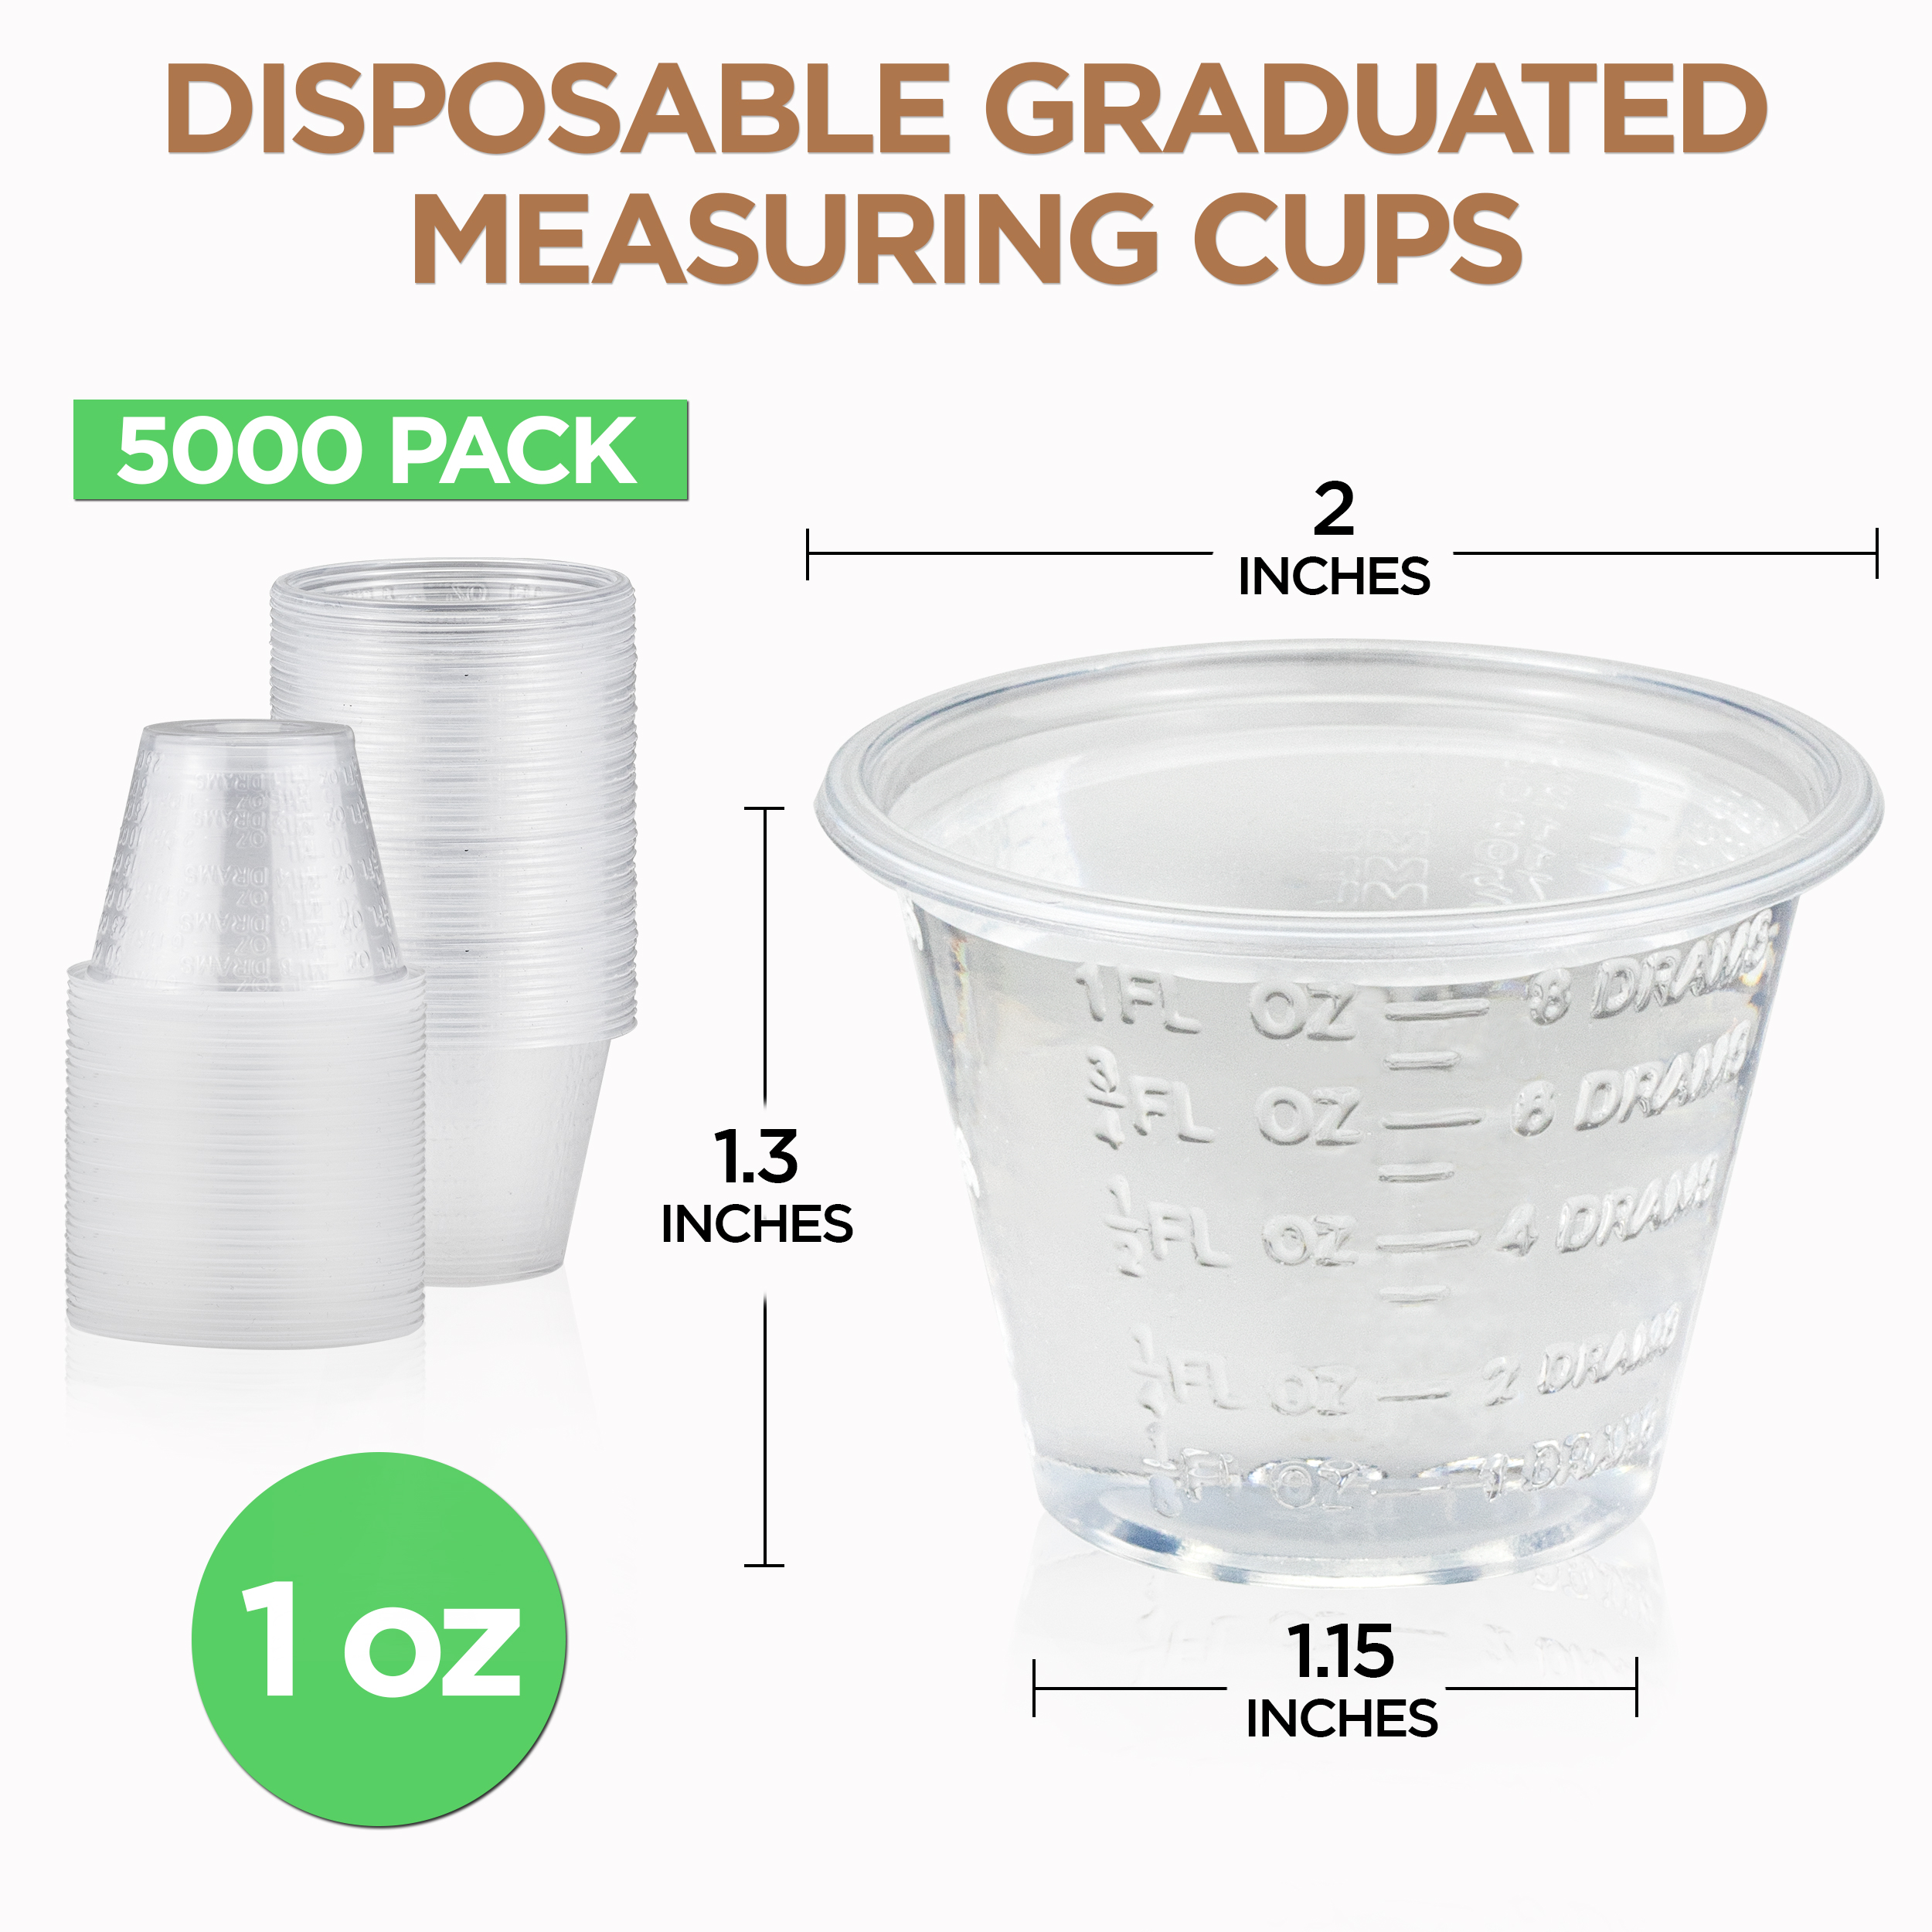 [5000 Pack] 1 oz Graduated Medicine Cups Polypropylene Disposable Measuring Cup - Clear Plastic Cups with mL, Dram, cc, Tbsp & fl oz Measure Markings